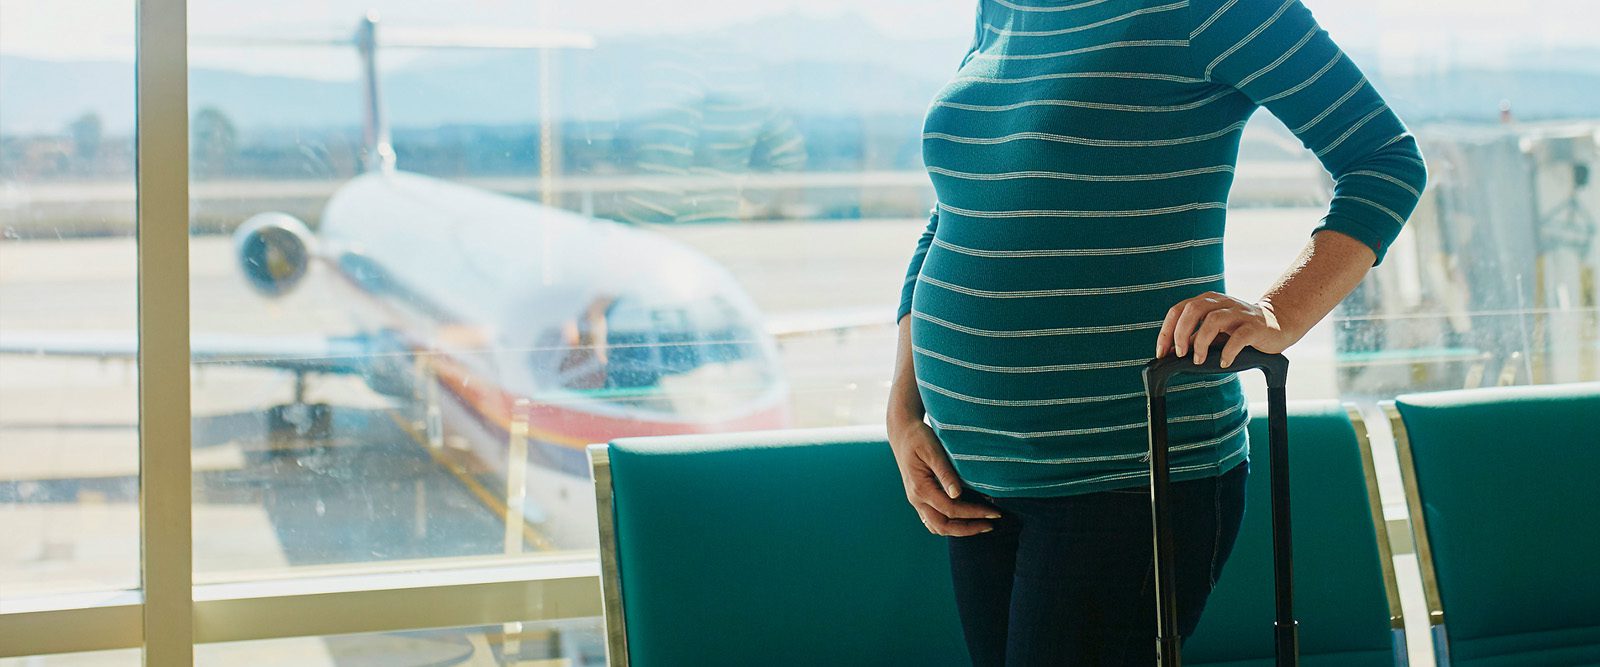 pregnant woman in airport, traveling while pregnant